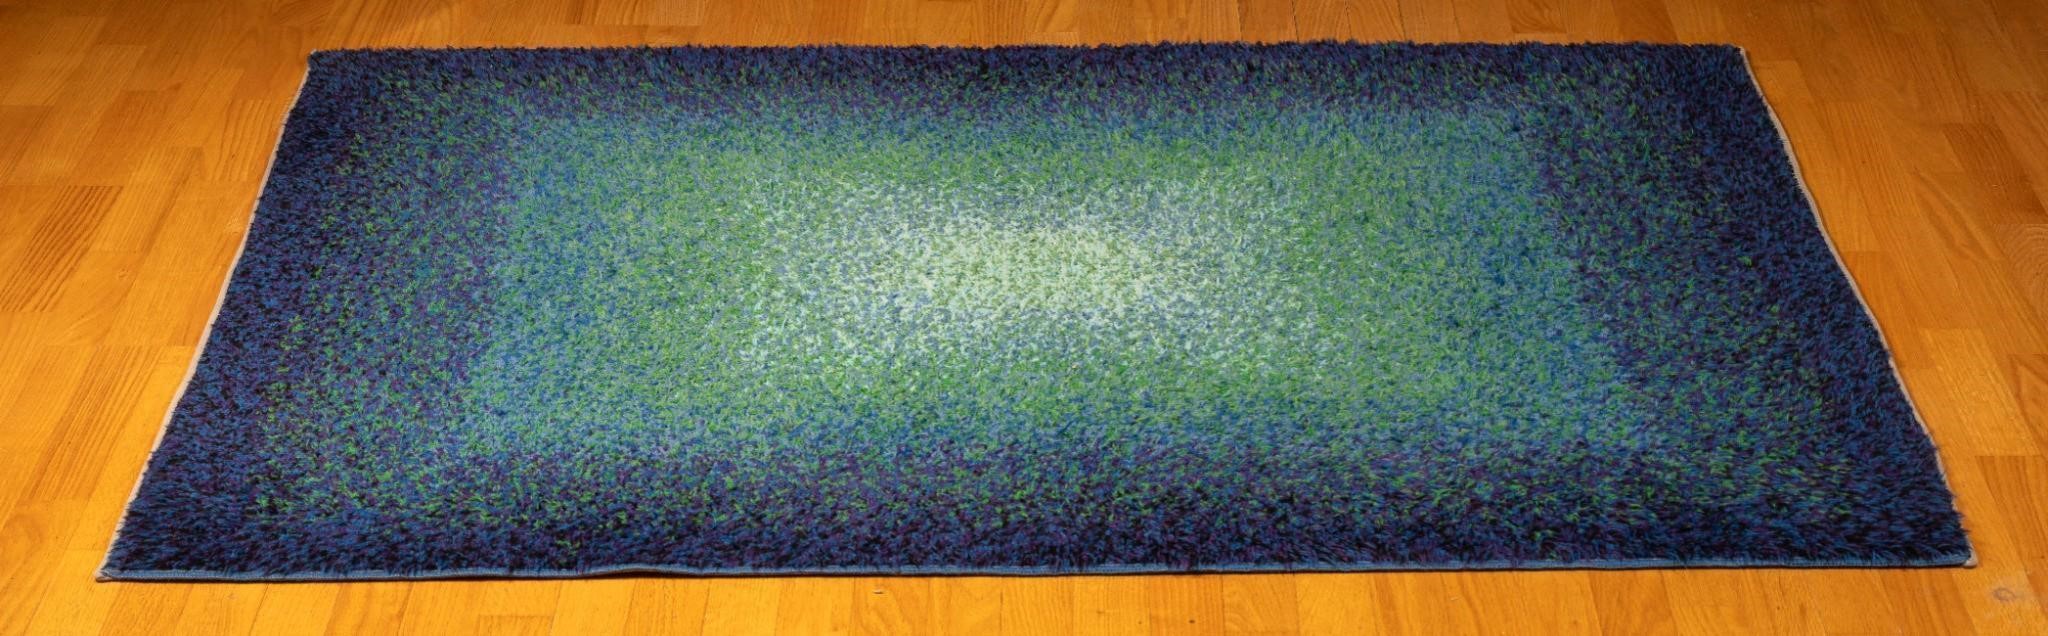 Vintage French High-Pile Area Rug in Blue